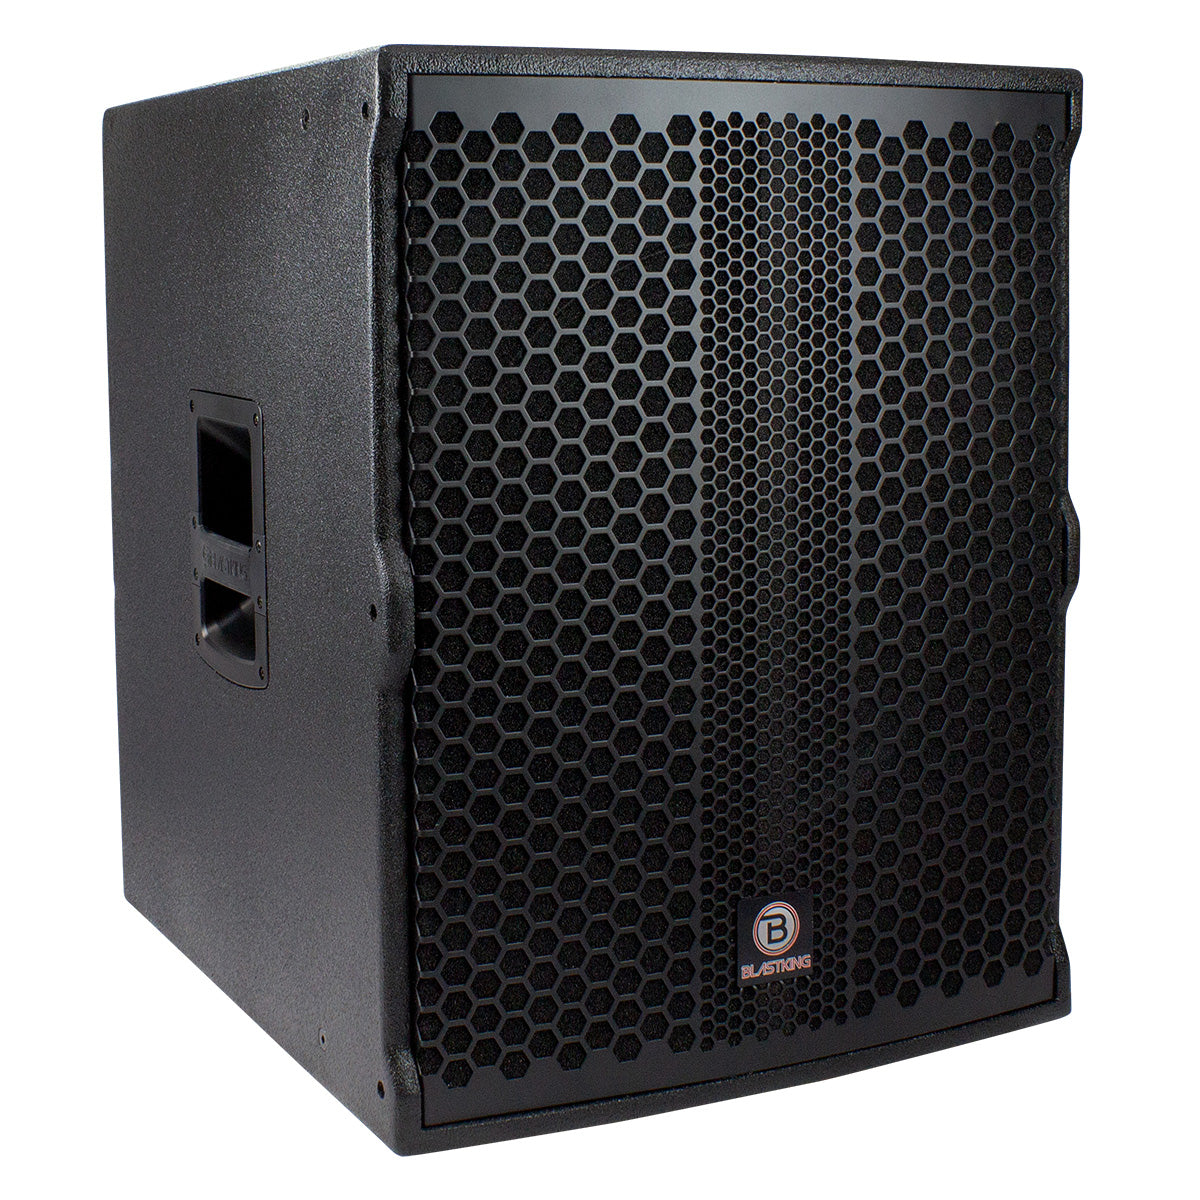 Blastking NOVO-18A 18” Active Subwoofer 1500 Watts Class-D with DSP Processor